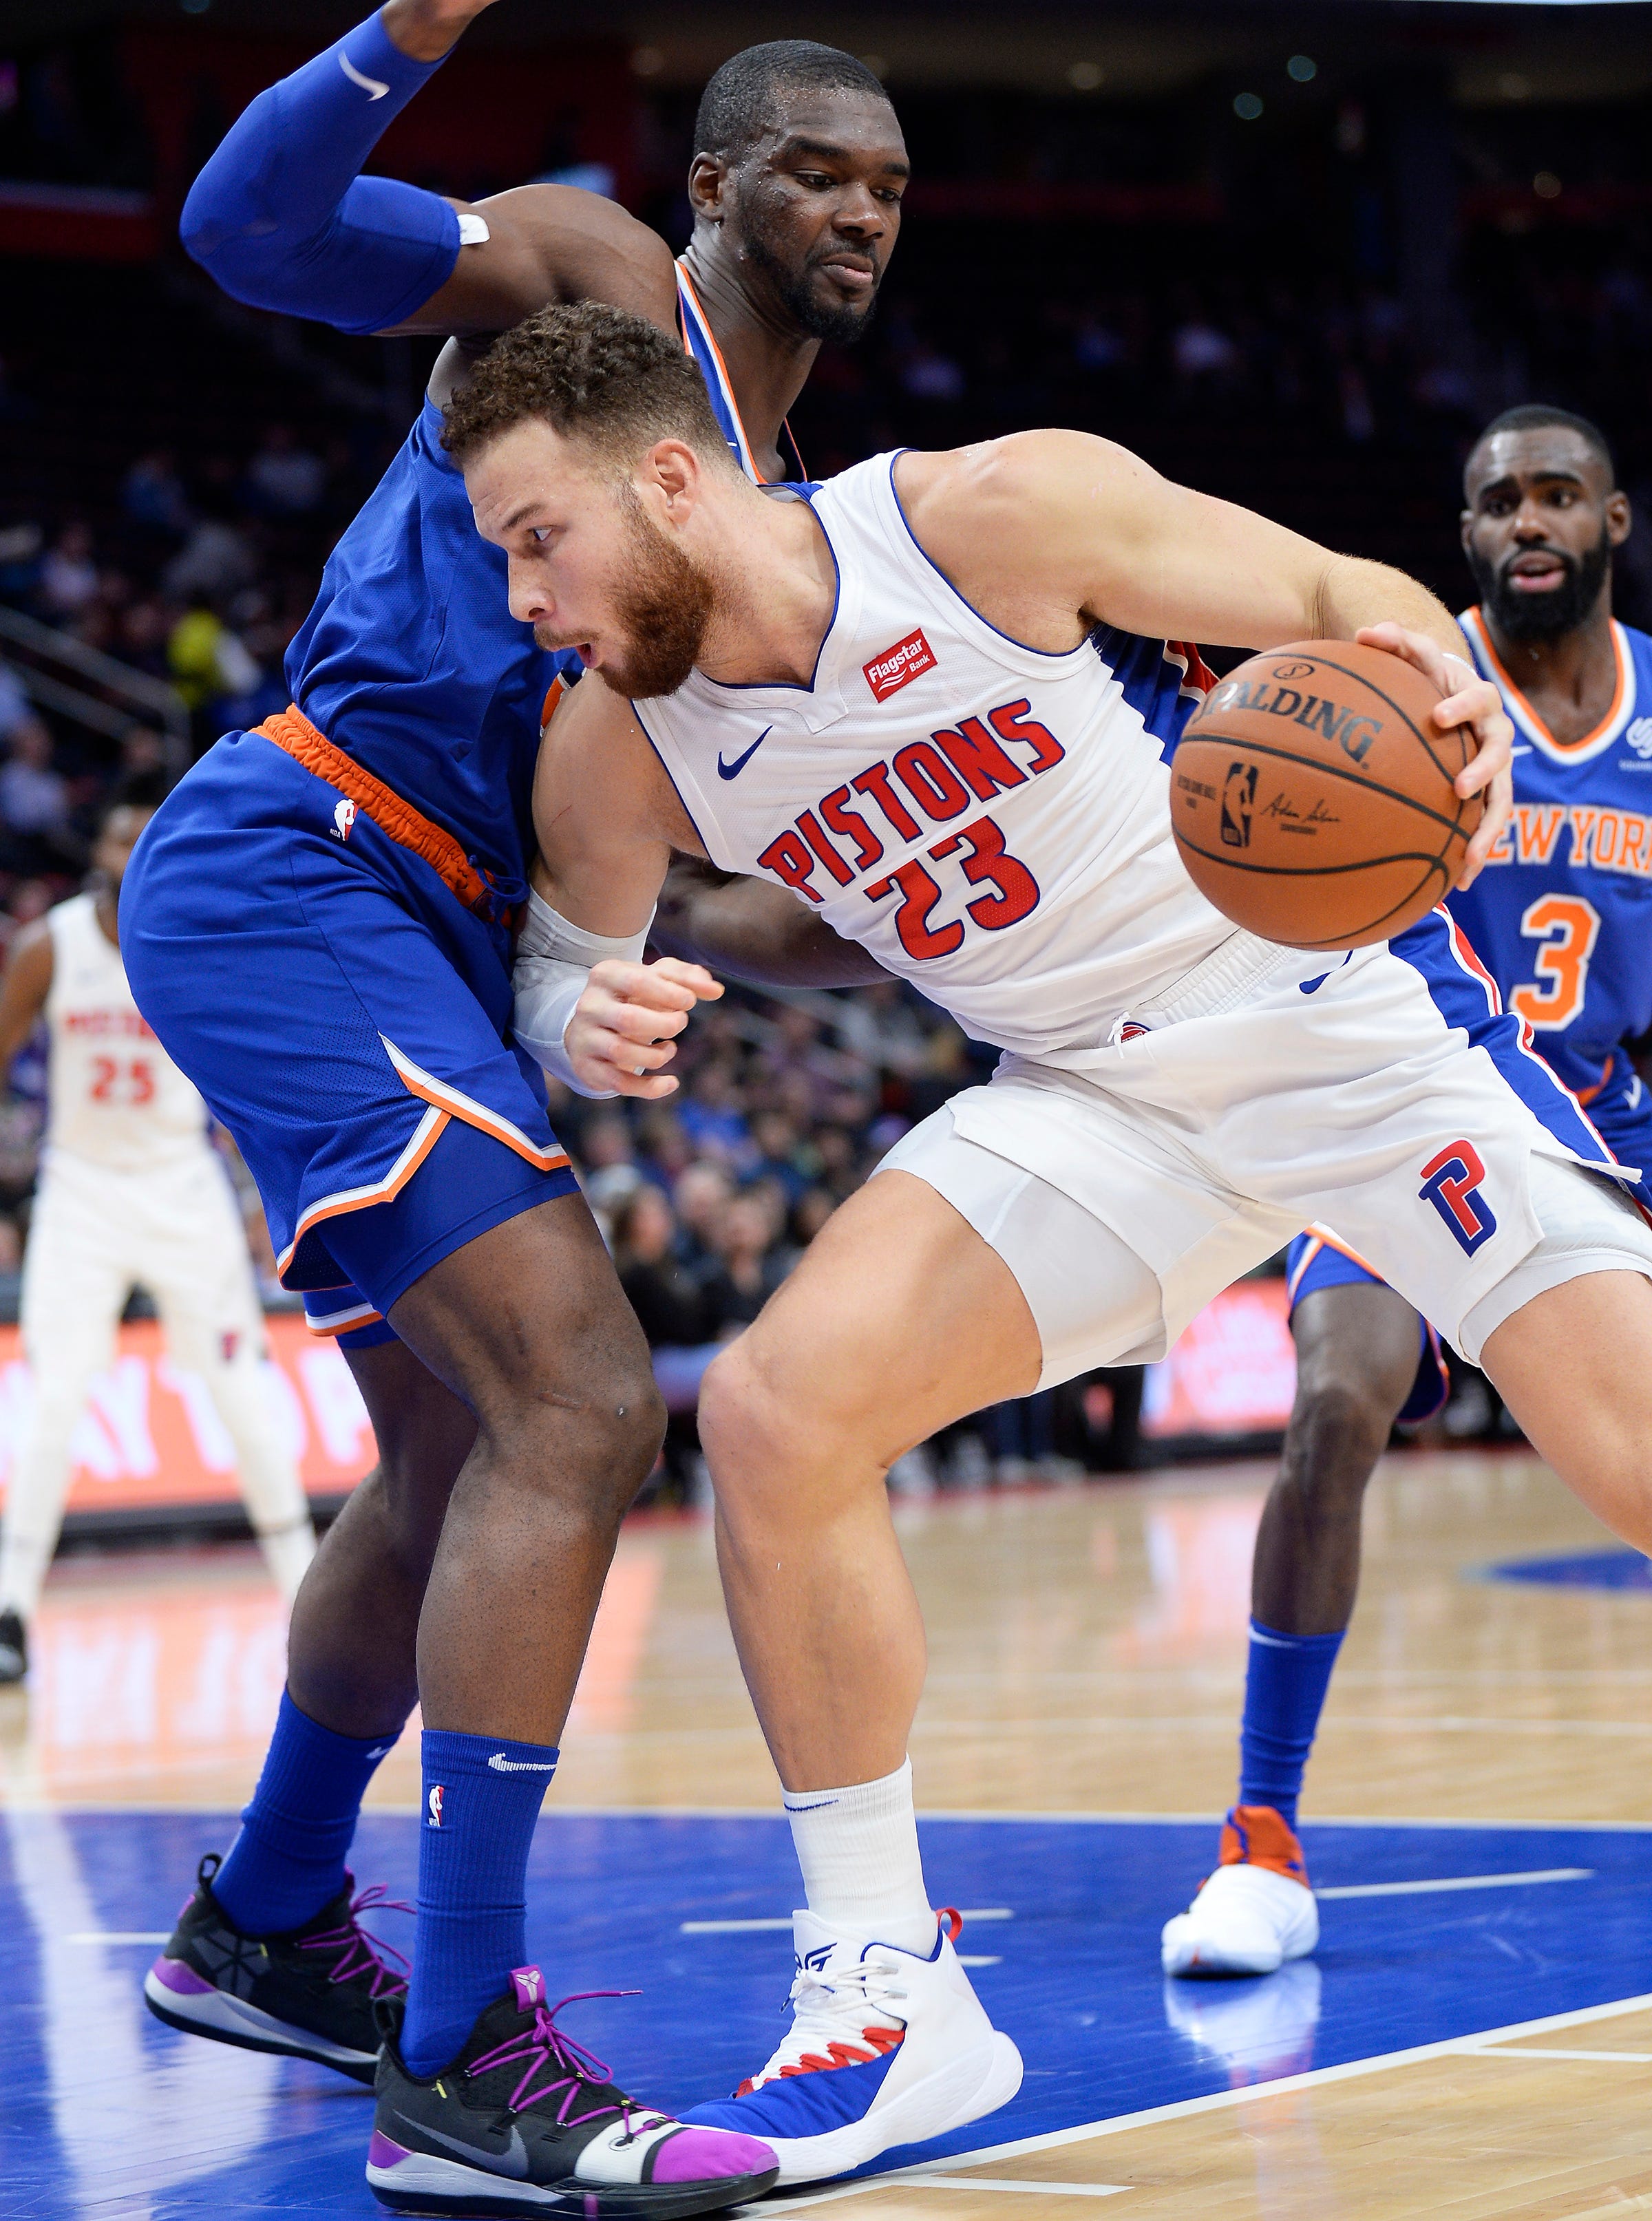 Pistons ' Blake Griffin drives around Knicks ' Noah Vonleh in the first quarter. Griffin had a game-high 30 points and four rebounds.